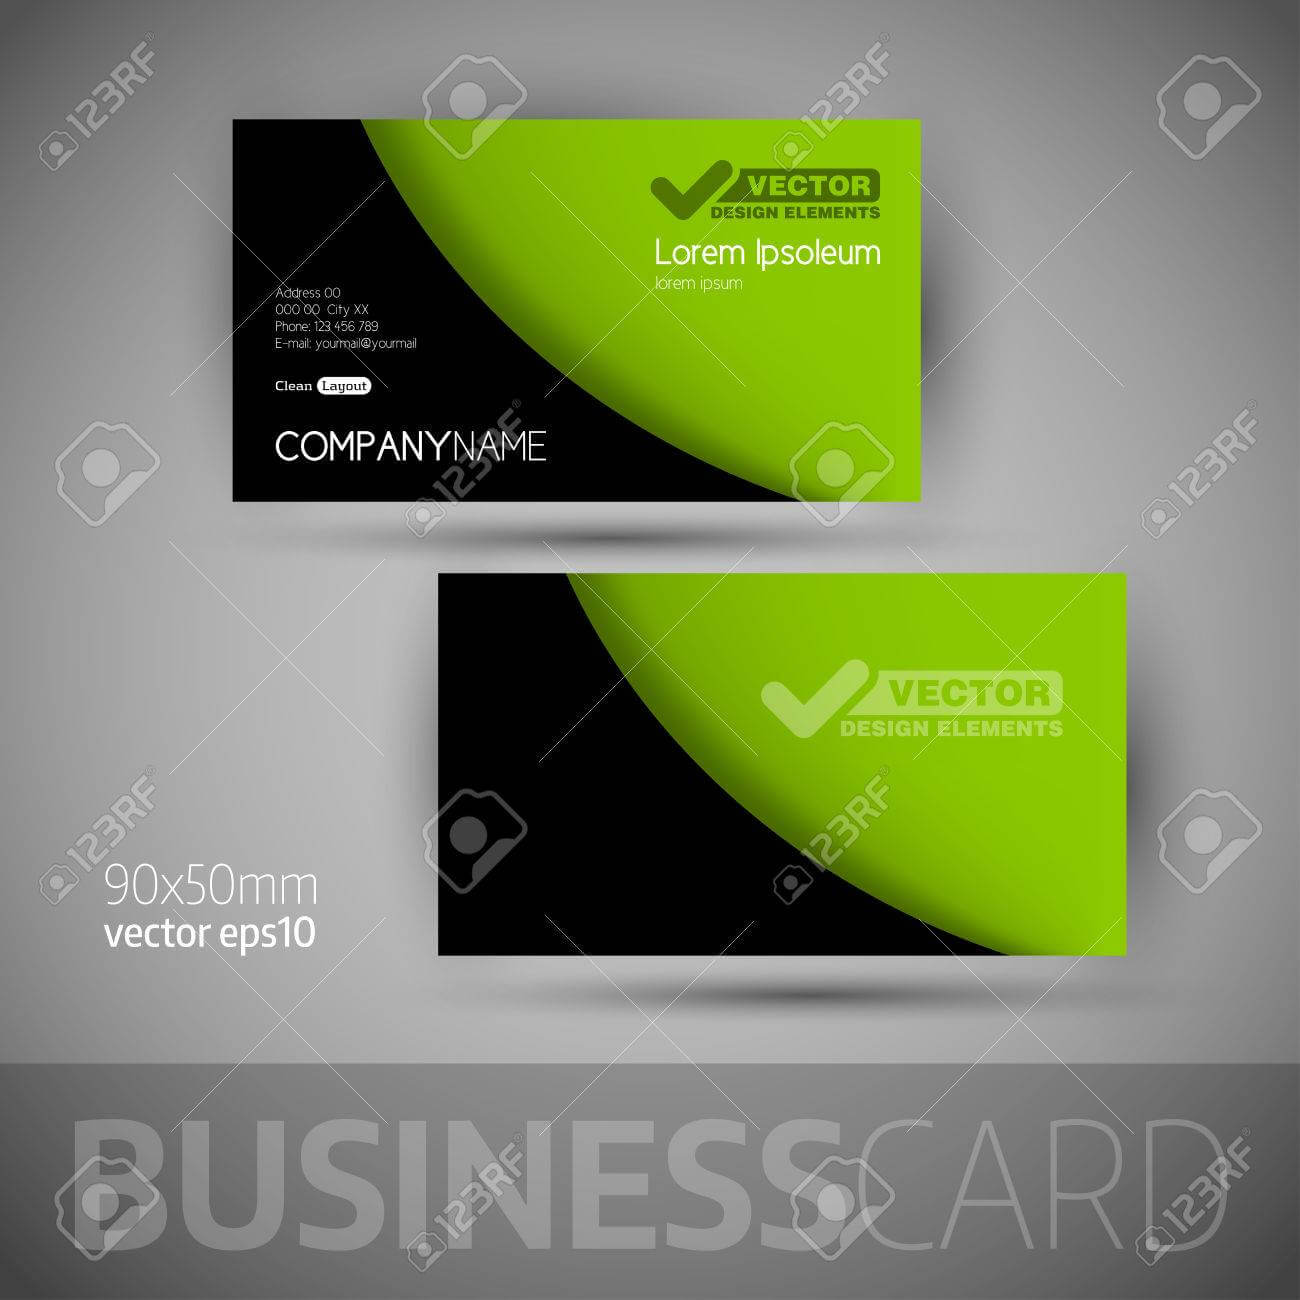 Business Card Template With Sample Texts. Elegant Vector Design.. Inside Calling Card Free Template